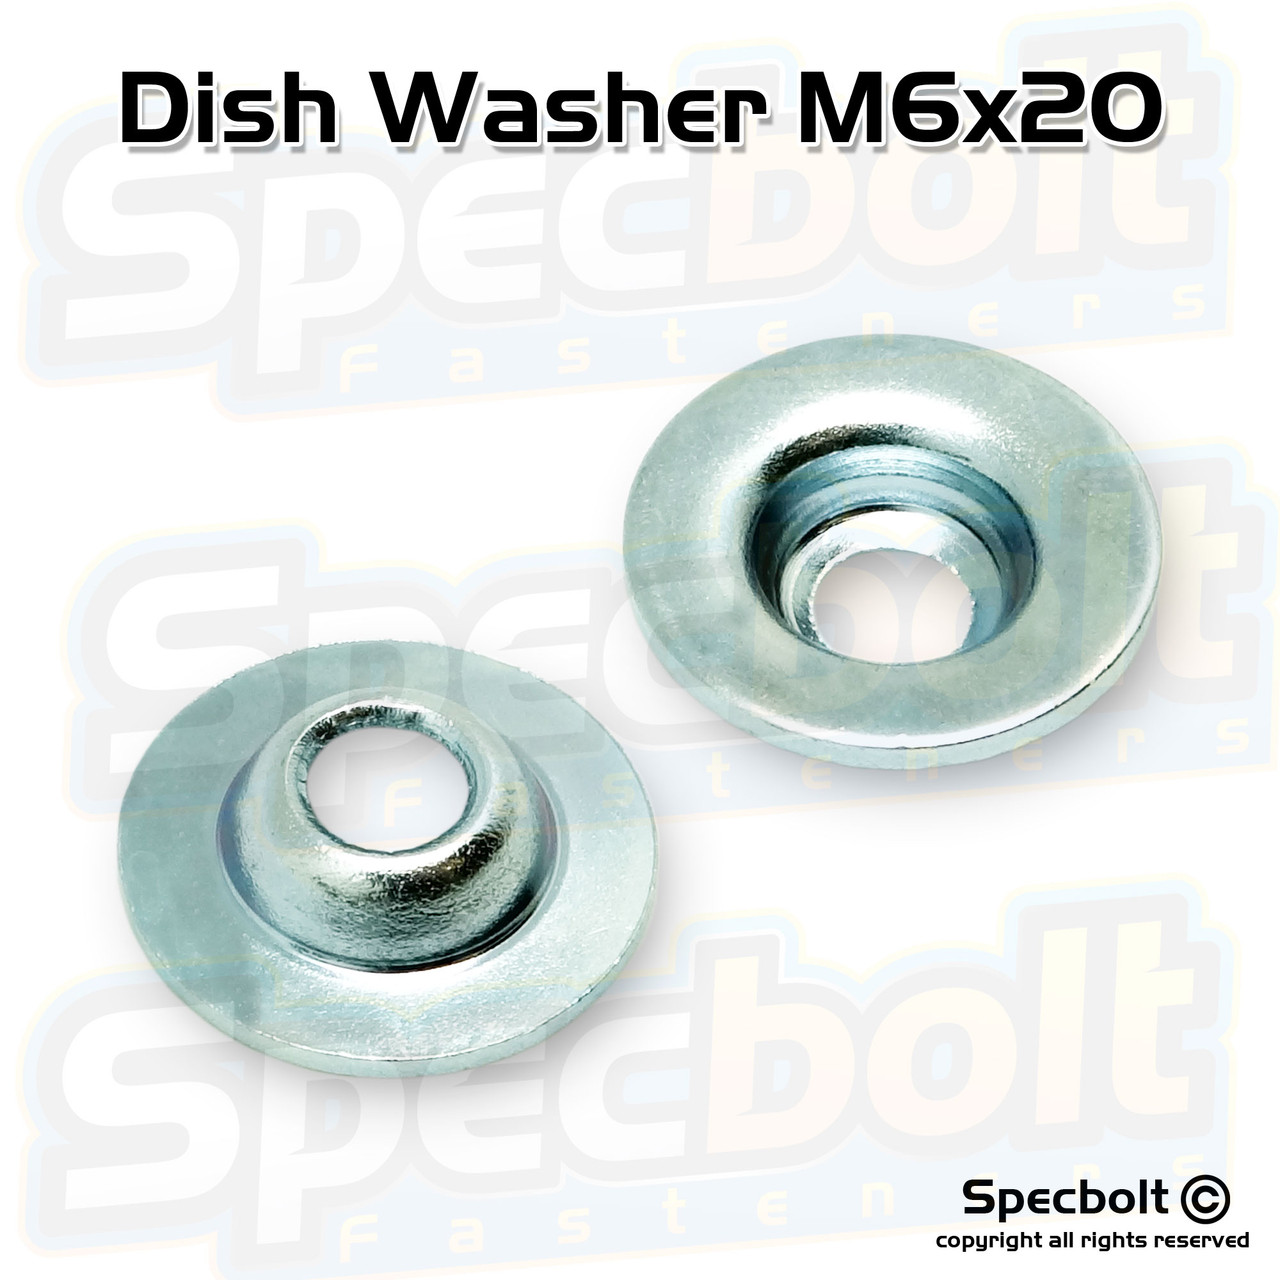 Dish Washer For Swing Arm Chain Slider M6x20 #92143-1676, 46104066050